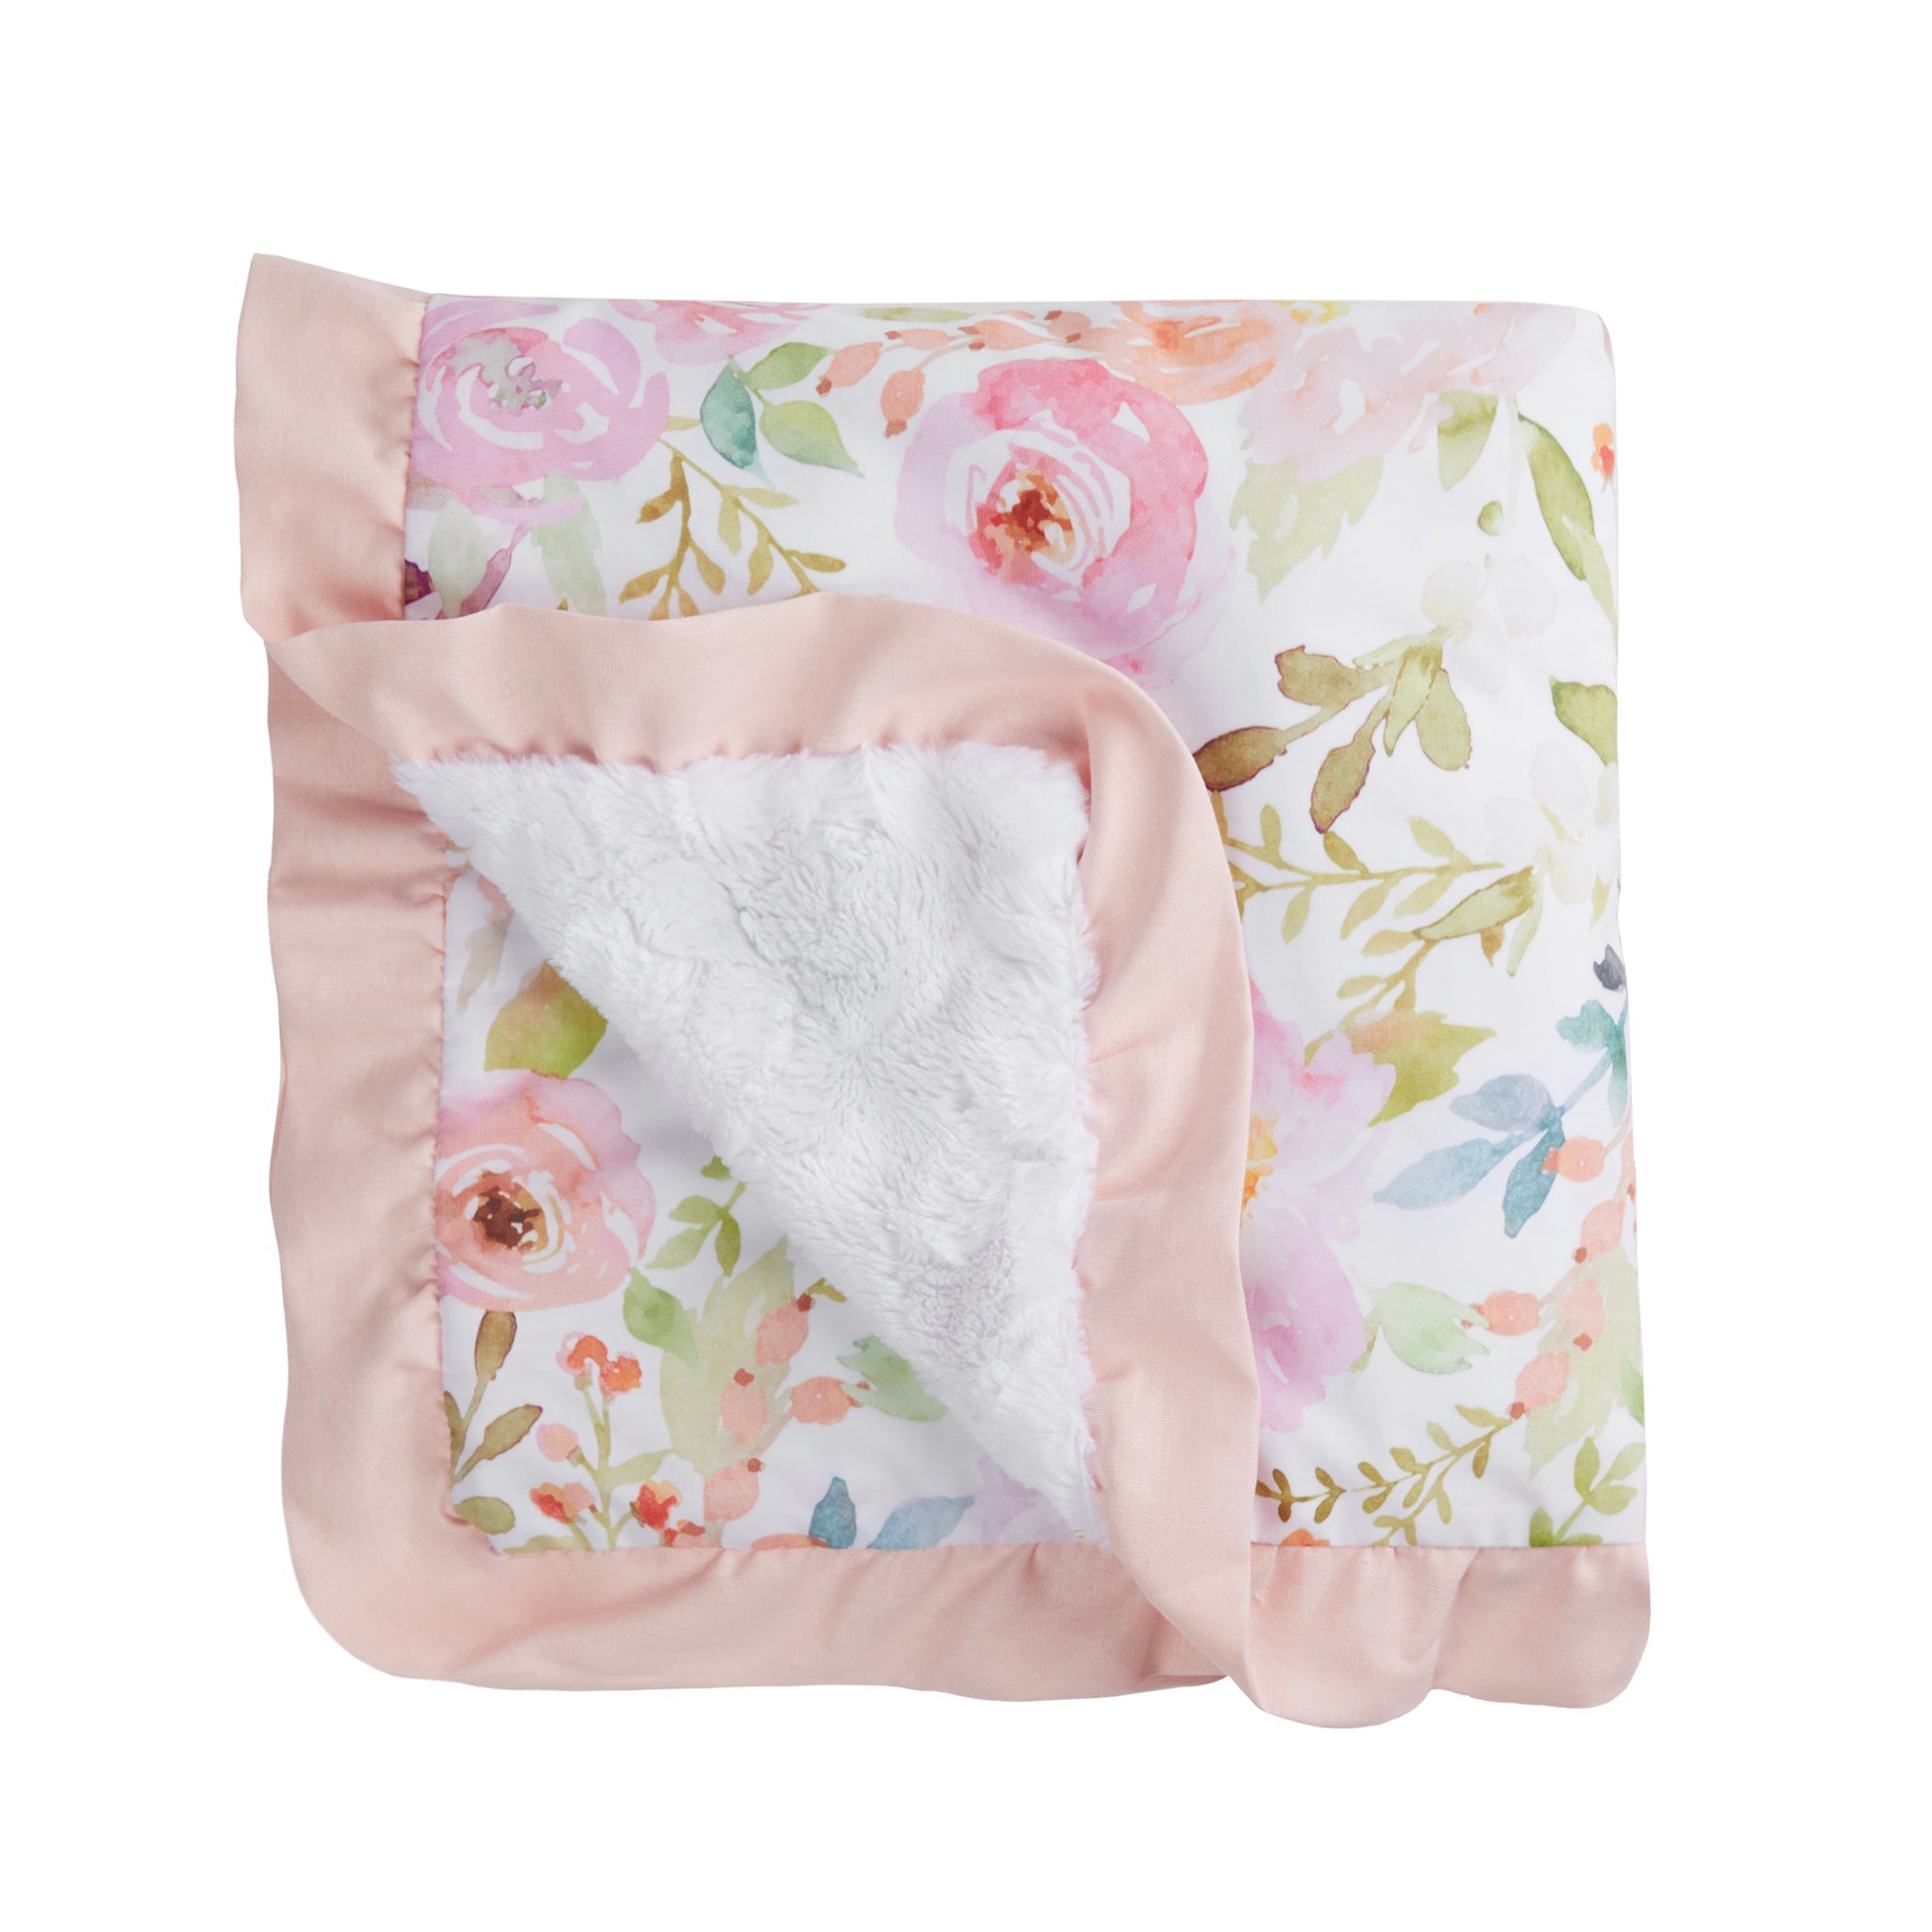 Blush Watercolor Floral Baby Blanket with Petal Pink Ruffle